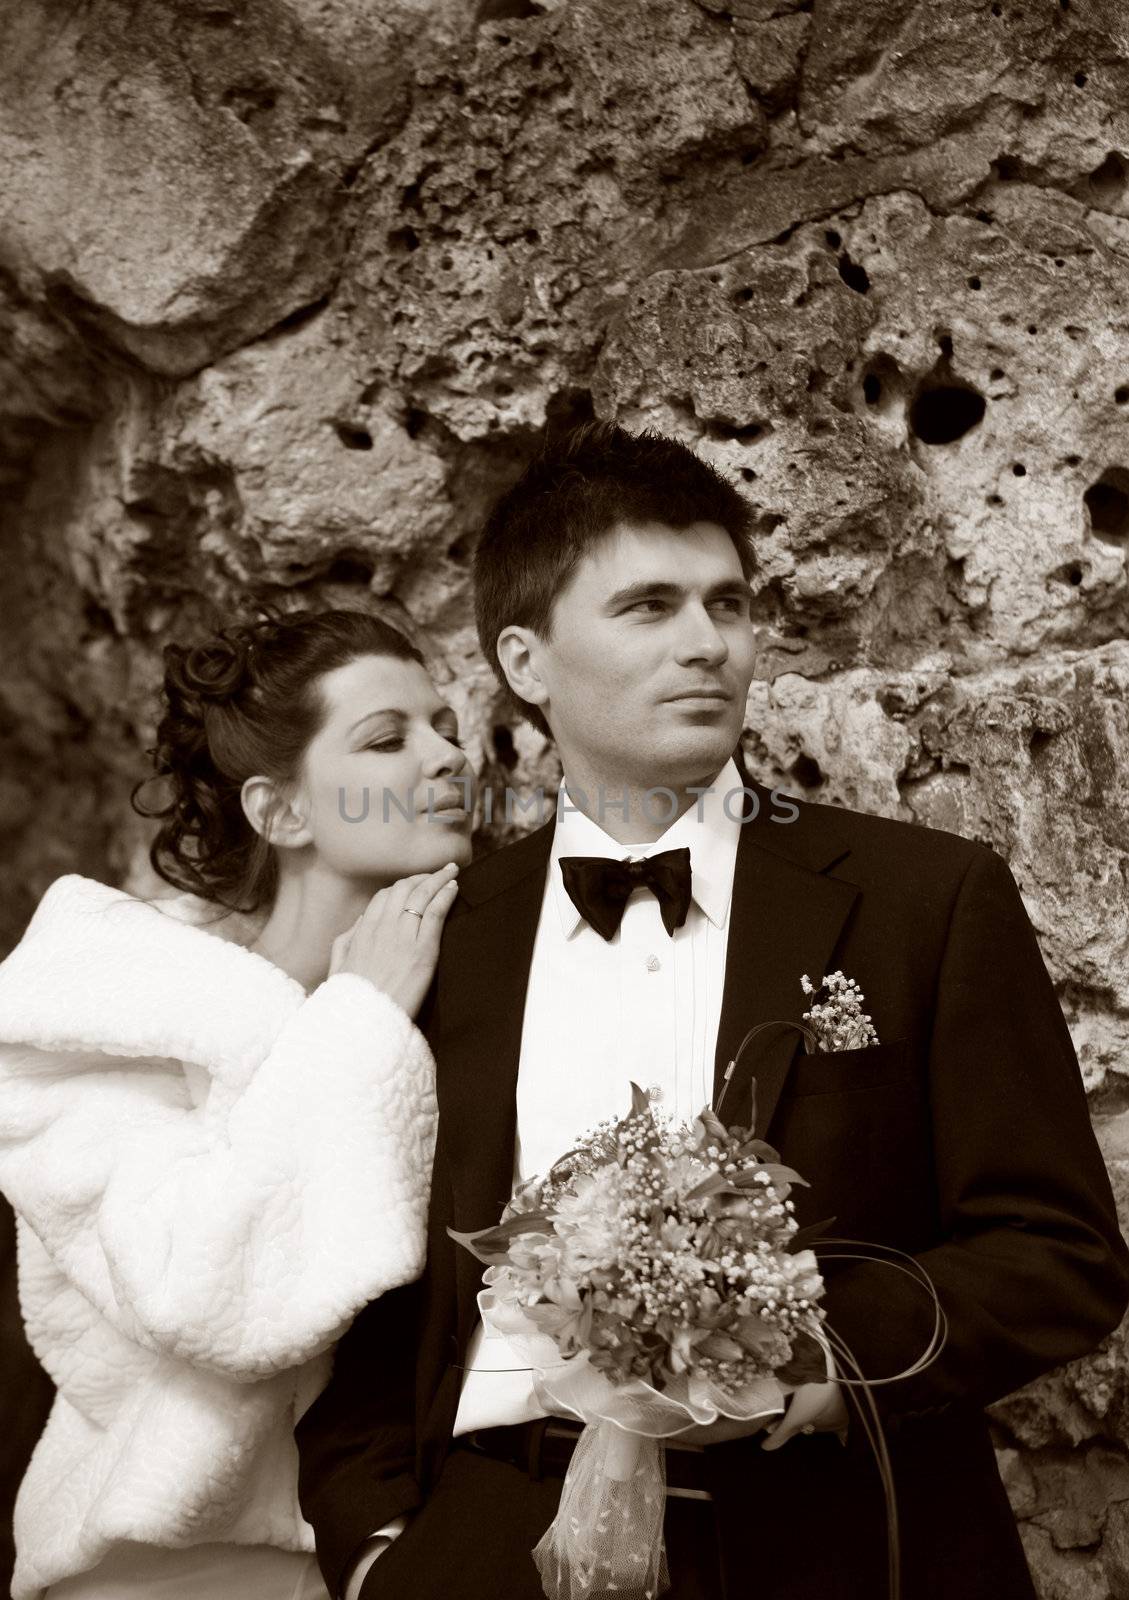 Recently married pair on a background of a stone. b/w+sepia